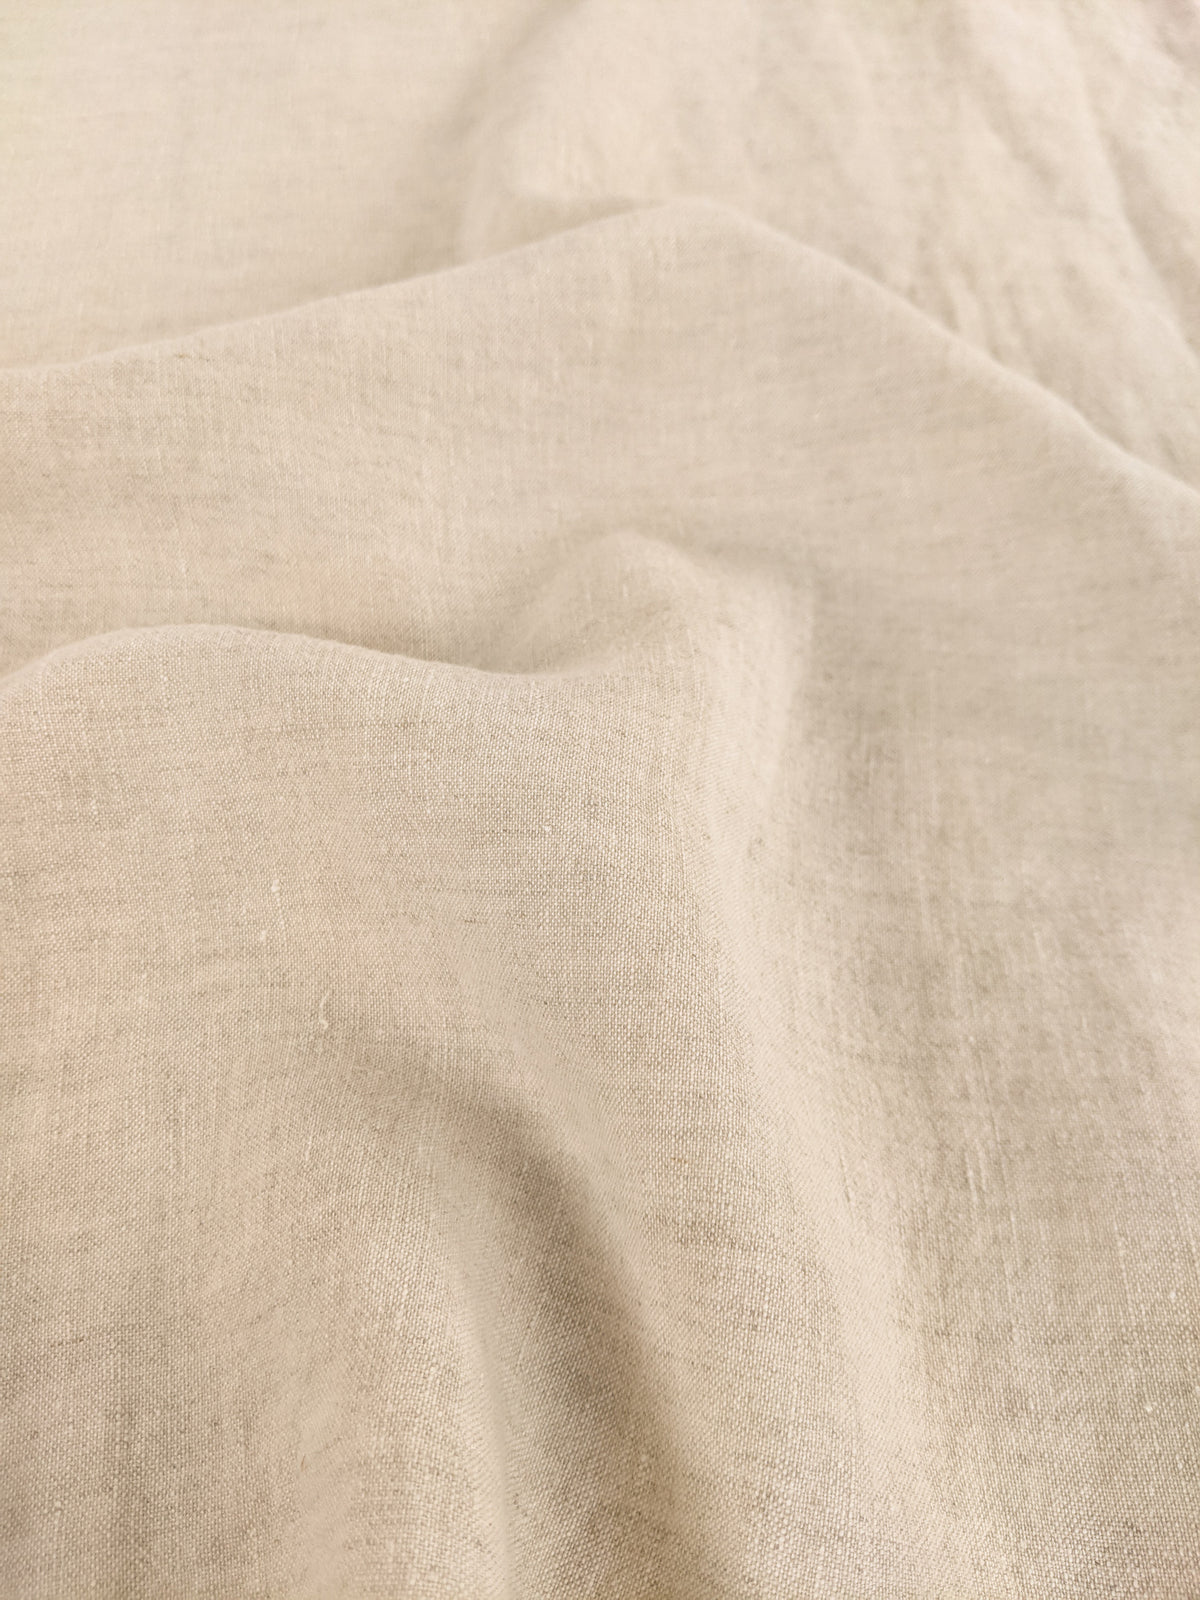 Washed Linen - Oatmeal